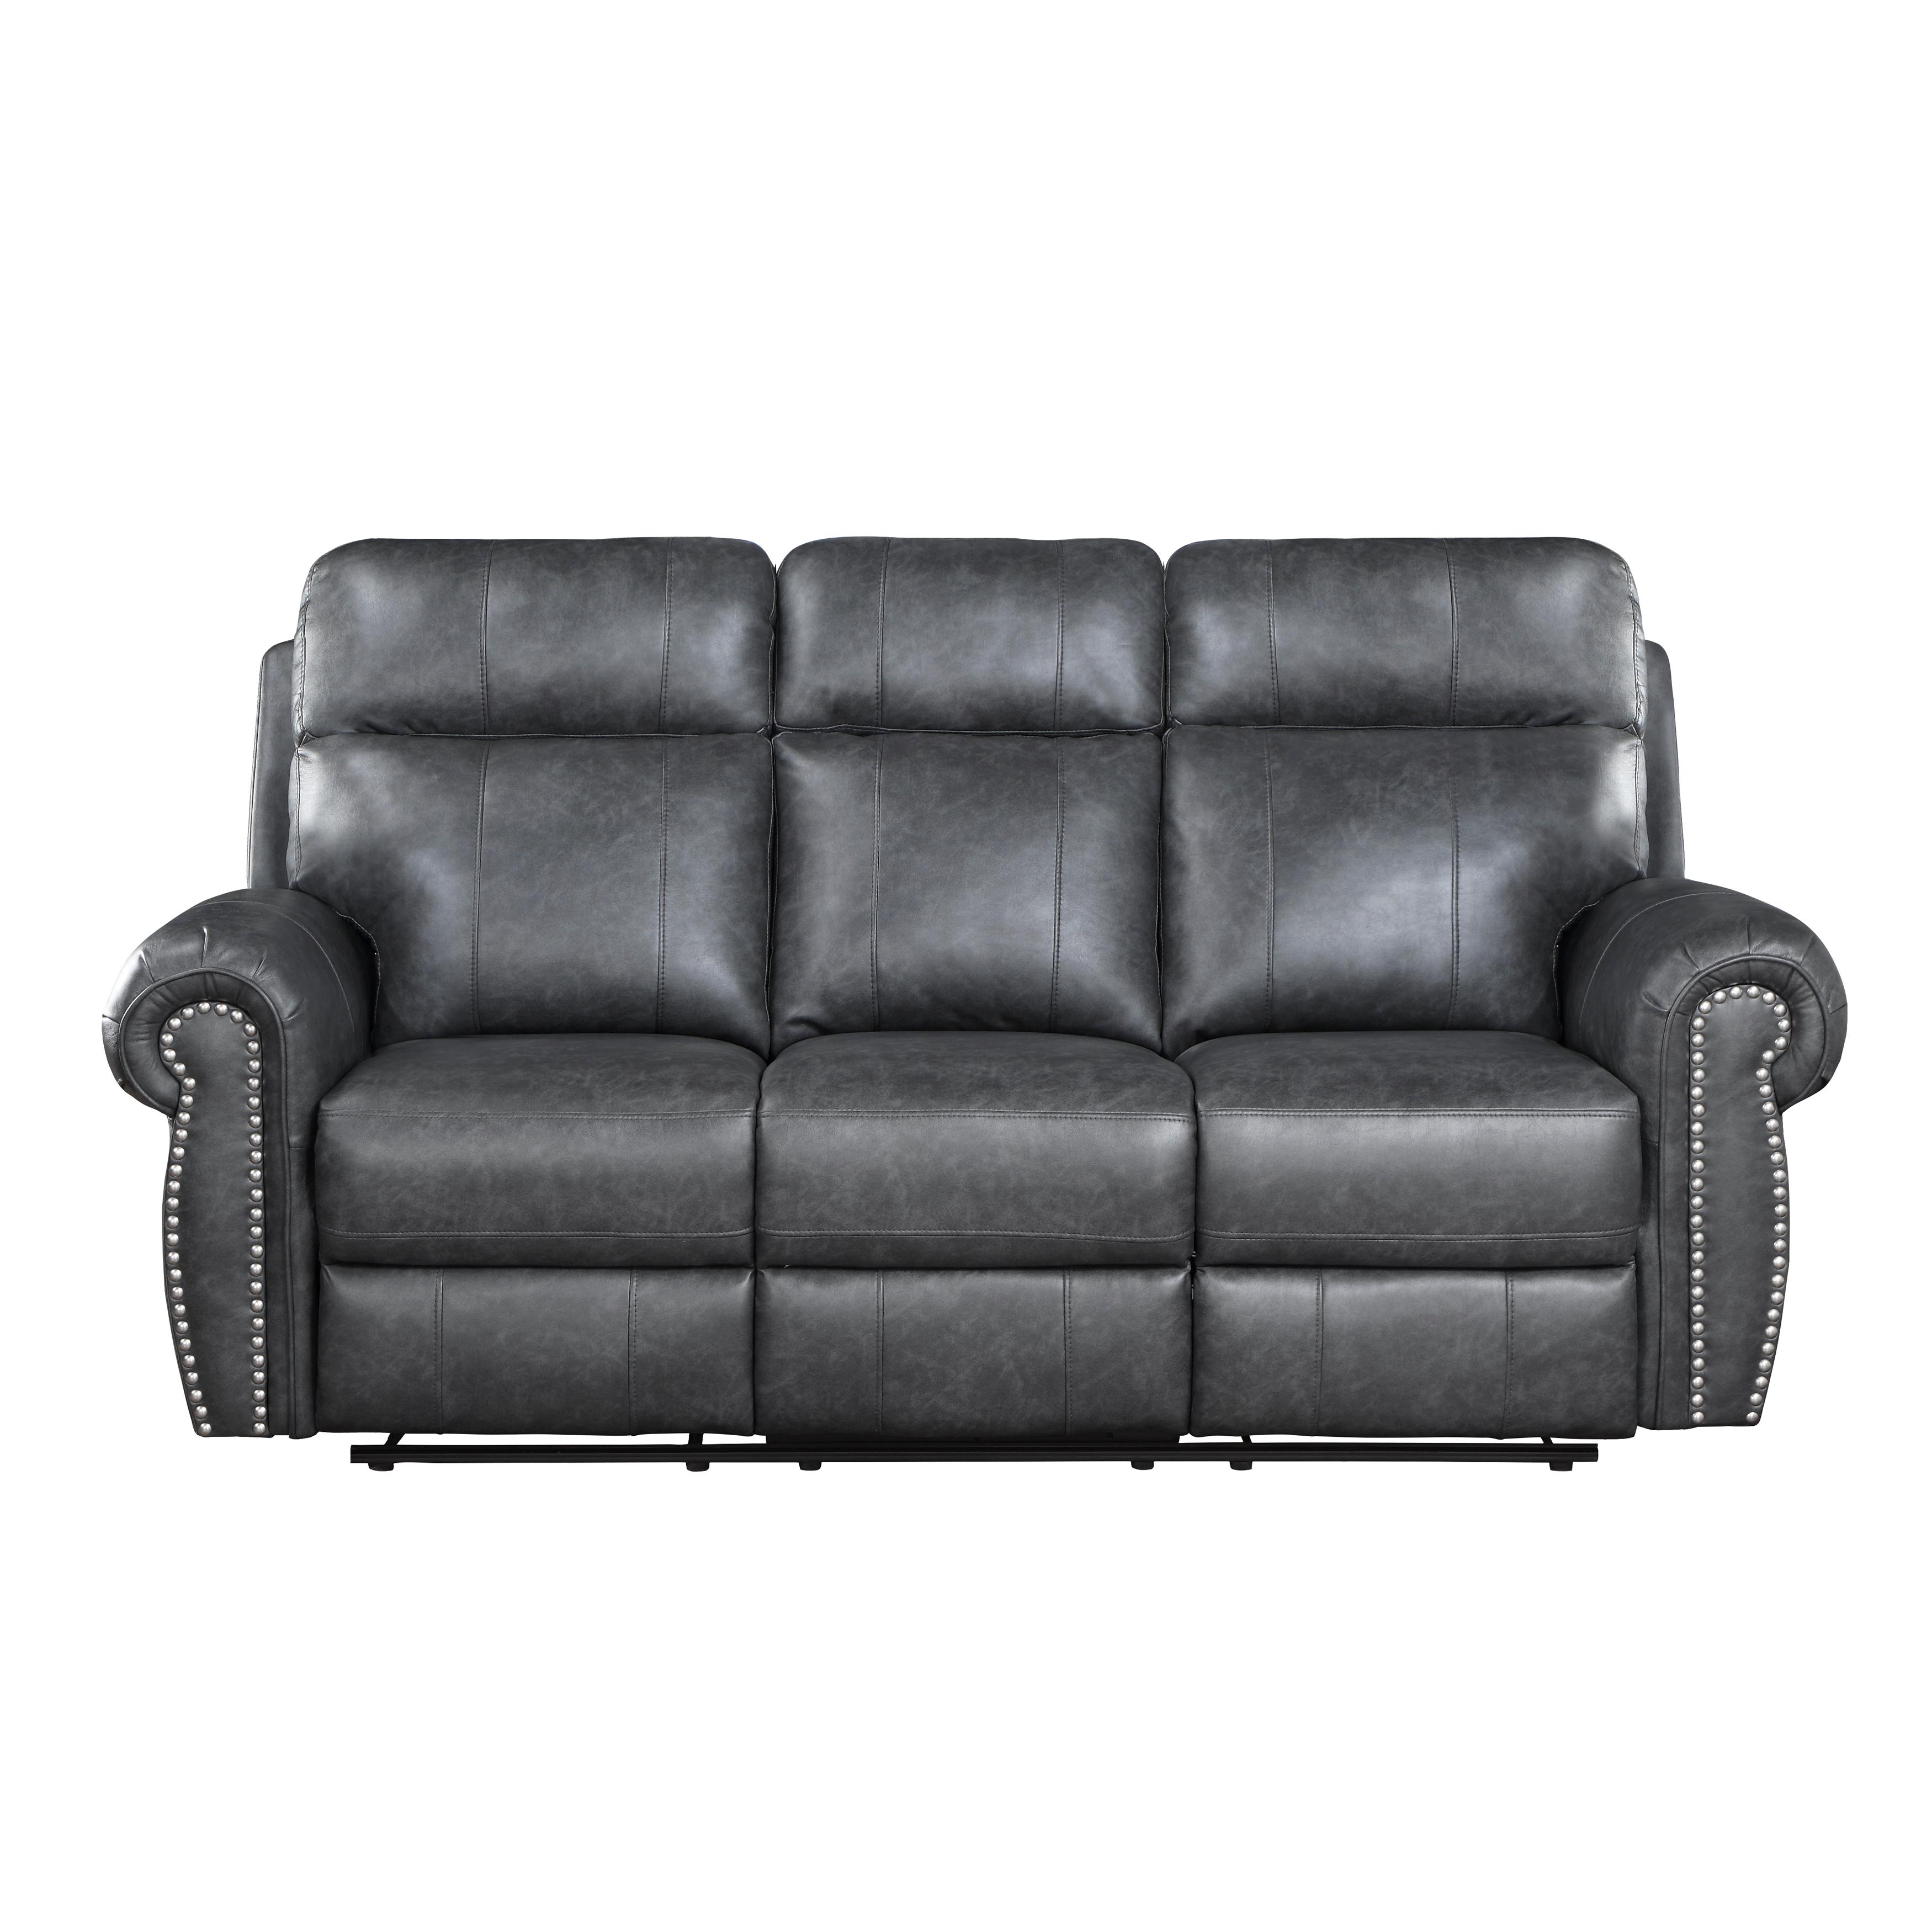 Transitional Reclining Sofa 9488GY-3 Granville 9488GY-3 in Gray Suede